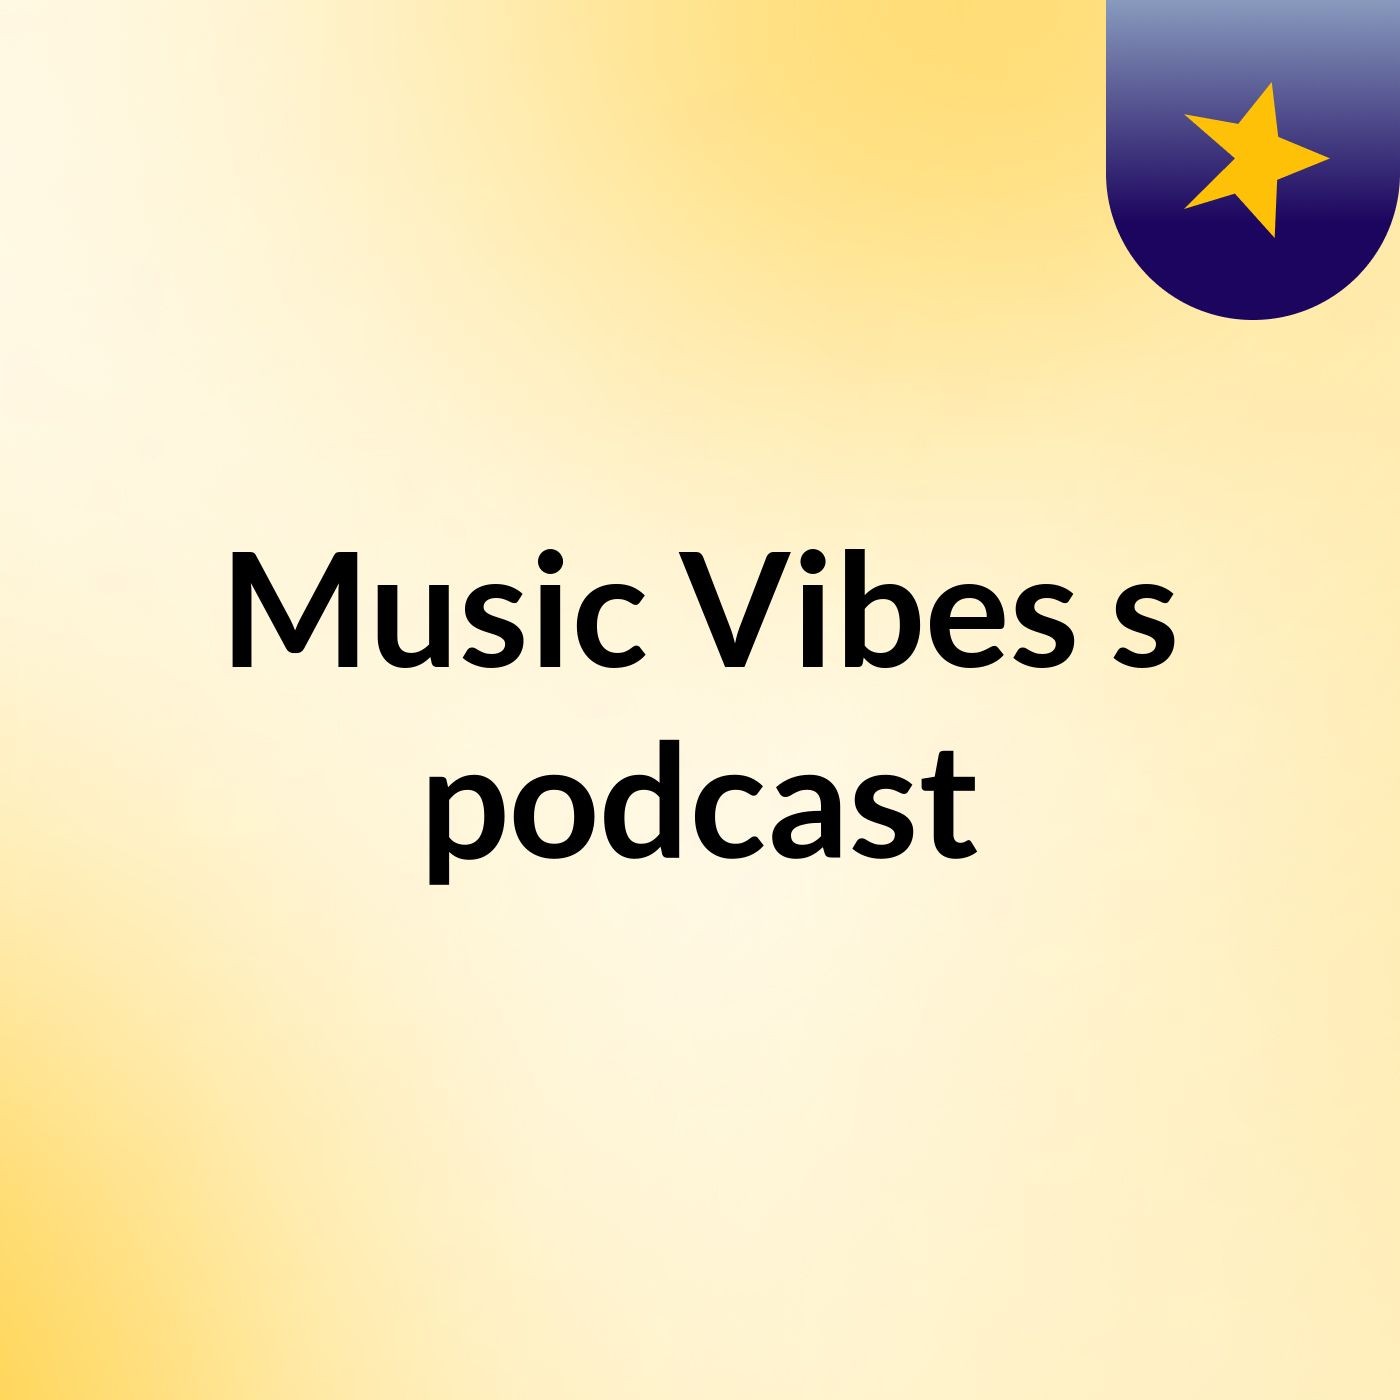 Music Vibes's podcast